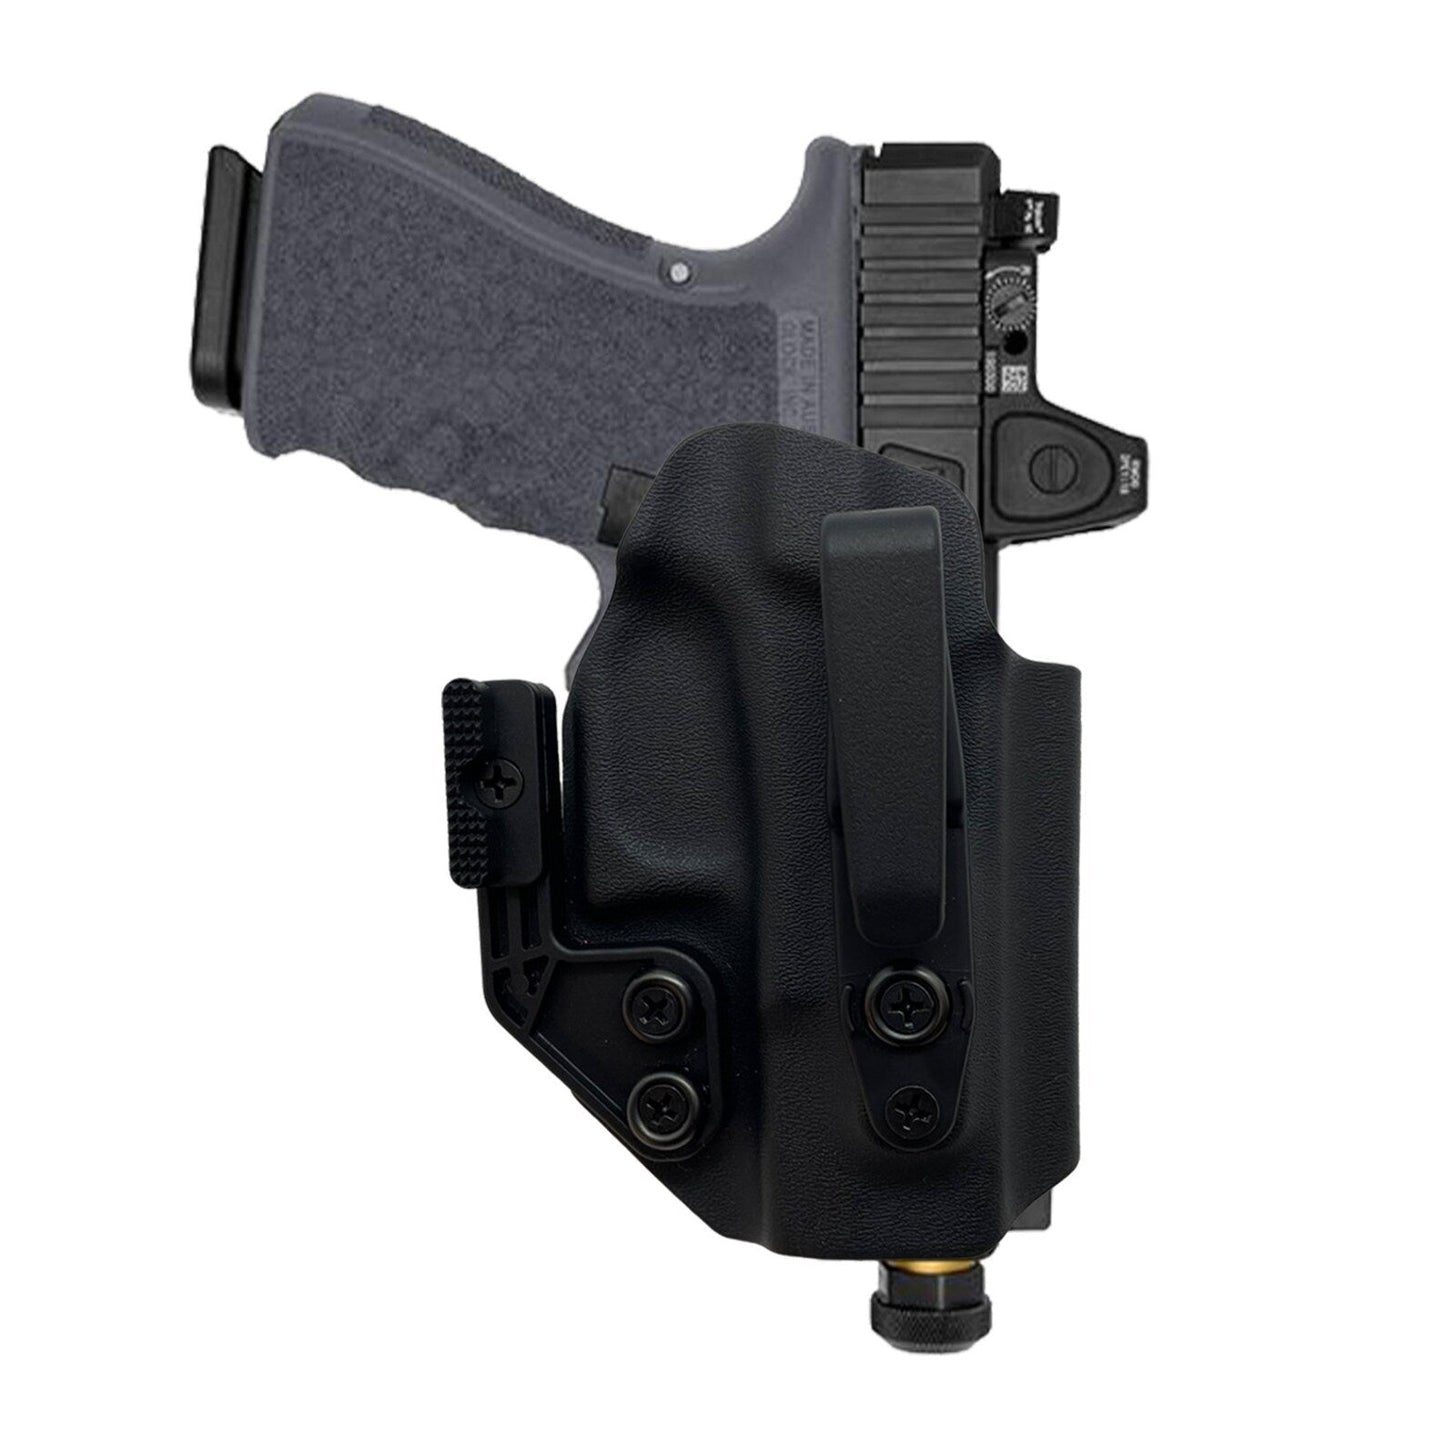 S&W M&P (SHIELD EZ) .380 (Micro Tuckable Holster) IWB (Inside The Waistband Holster)